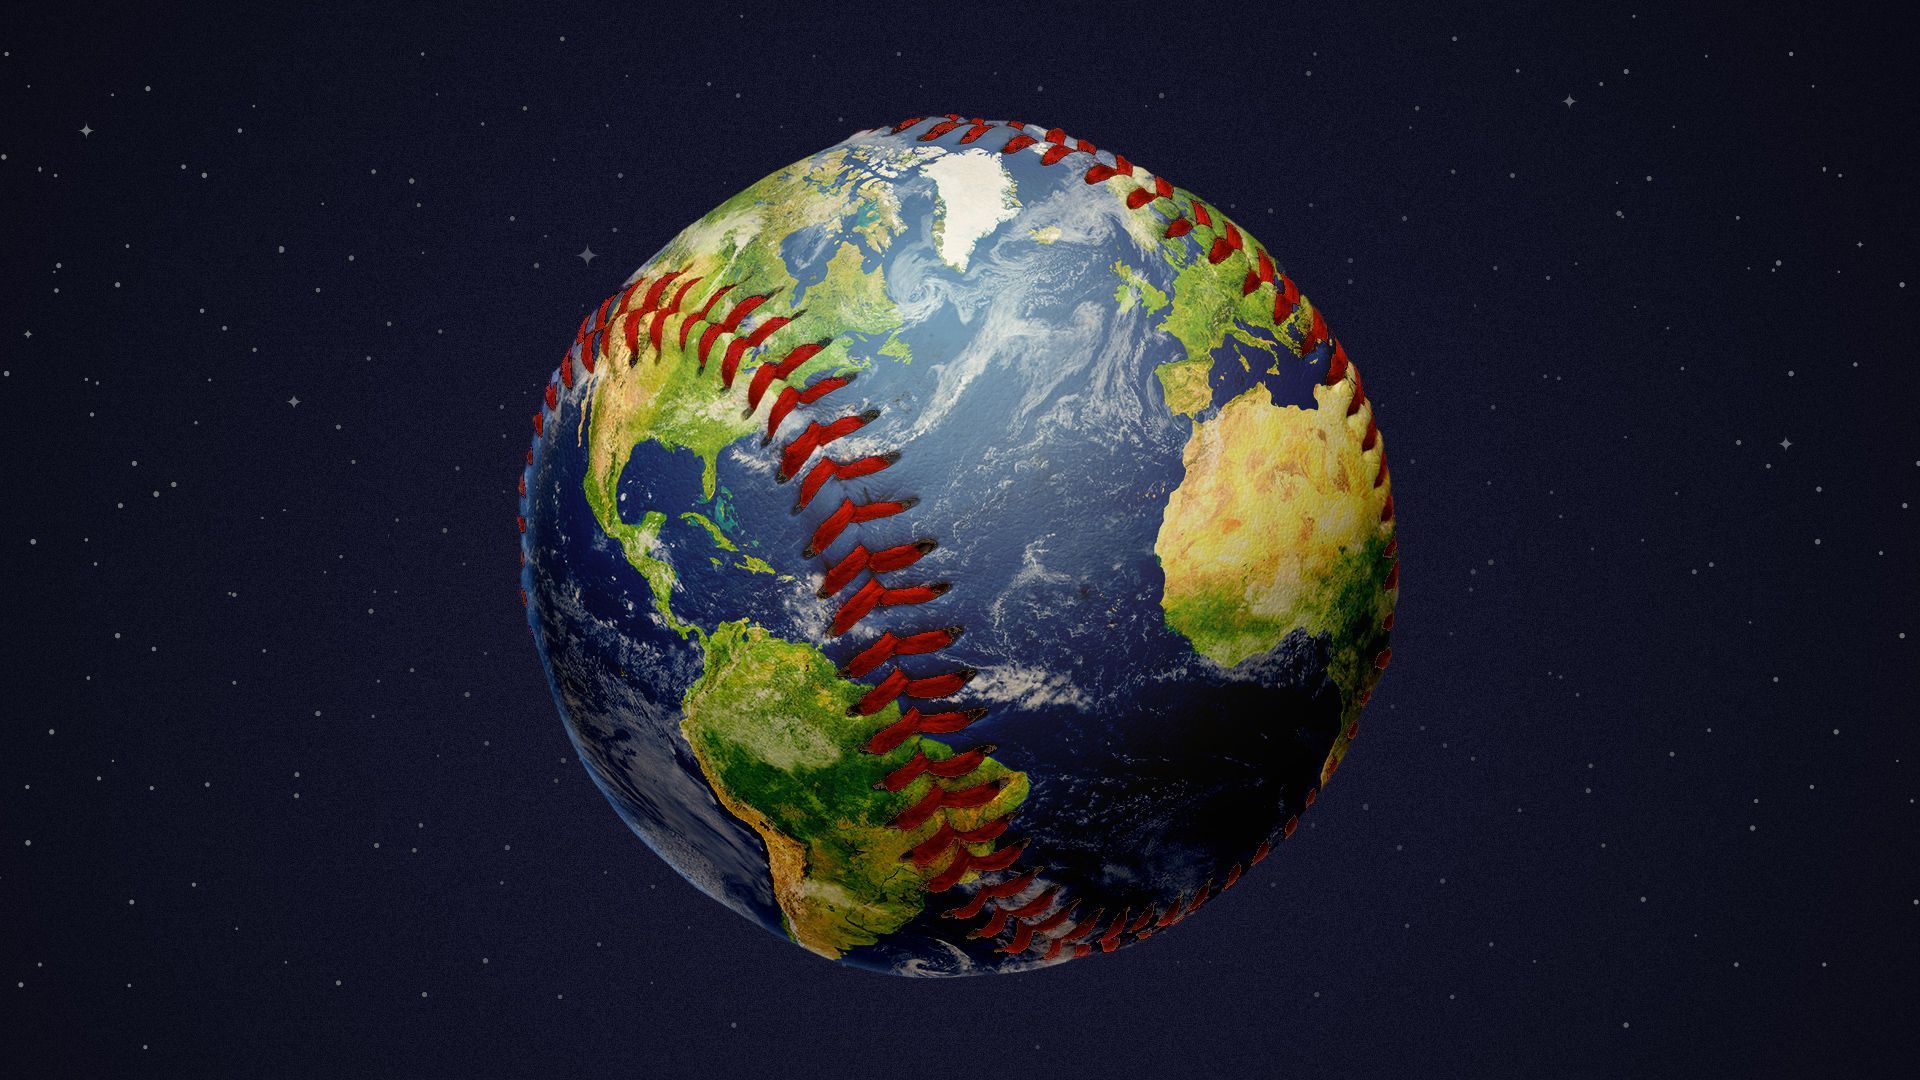 Illustration of a baseball stylized as the Earth floating in space.  